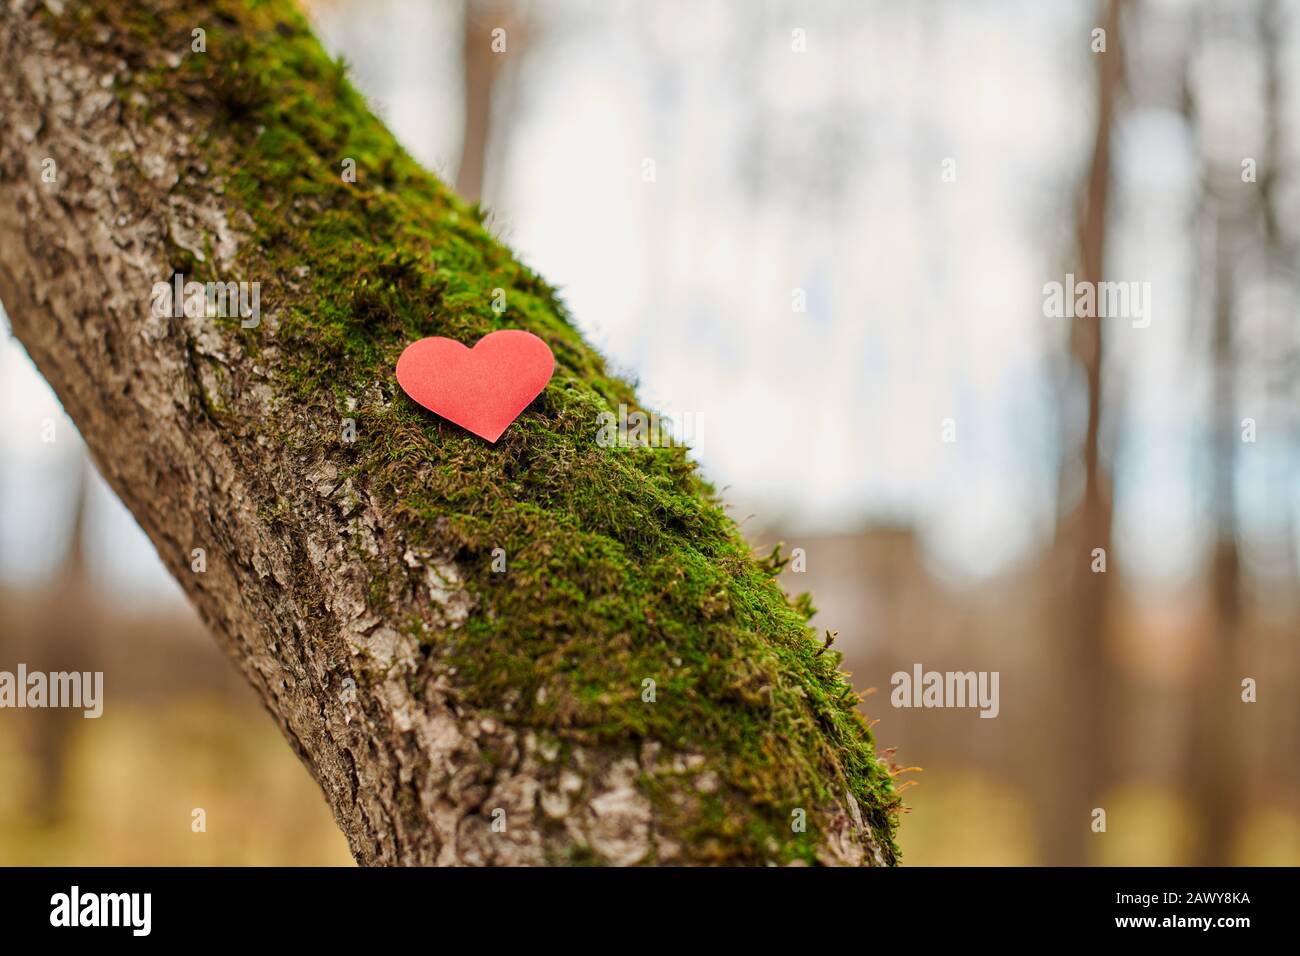 Heart on tree. Save forest and nature. Environment protection symbol, copy space. Deforestation or arboriculture tree love concept. Stock Photo